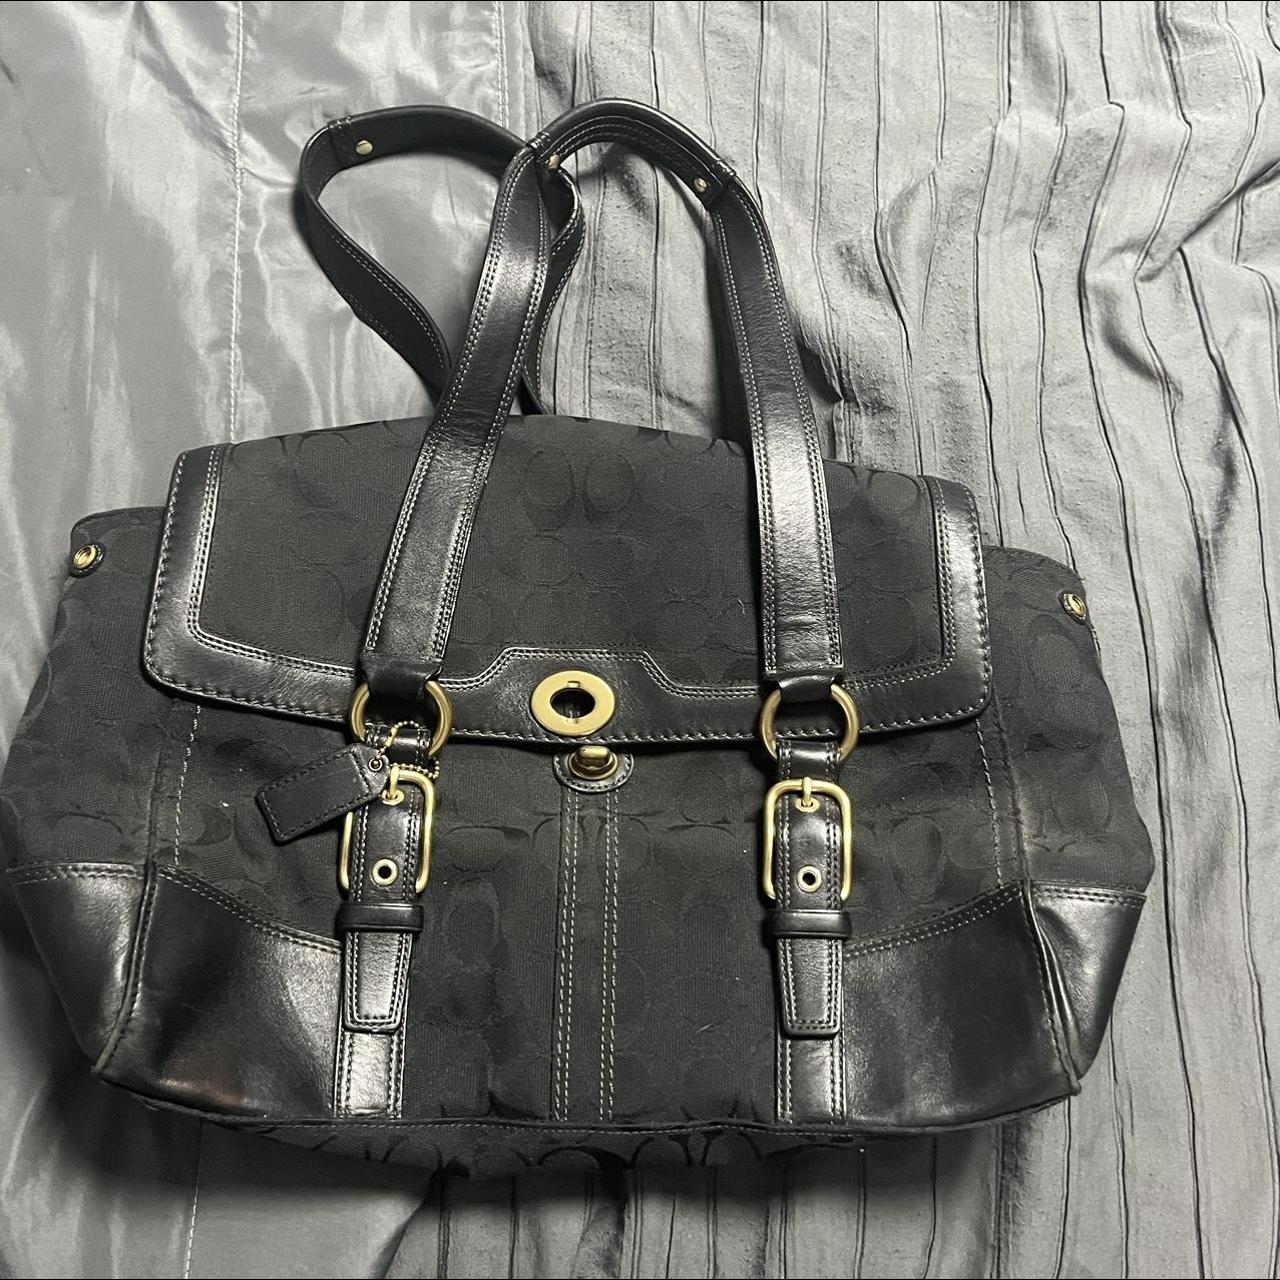 Vintage Coach bag from early 2000s. - Depop